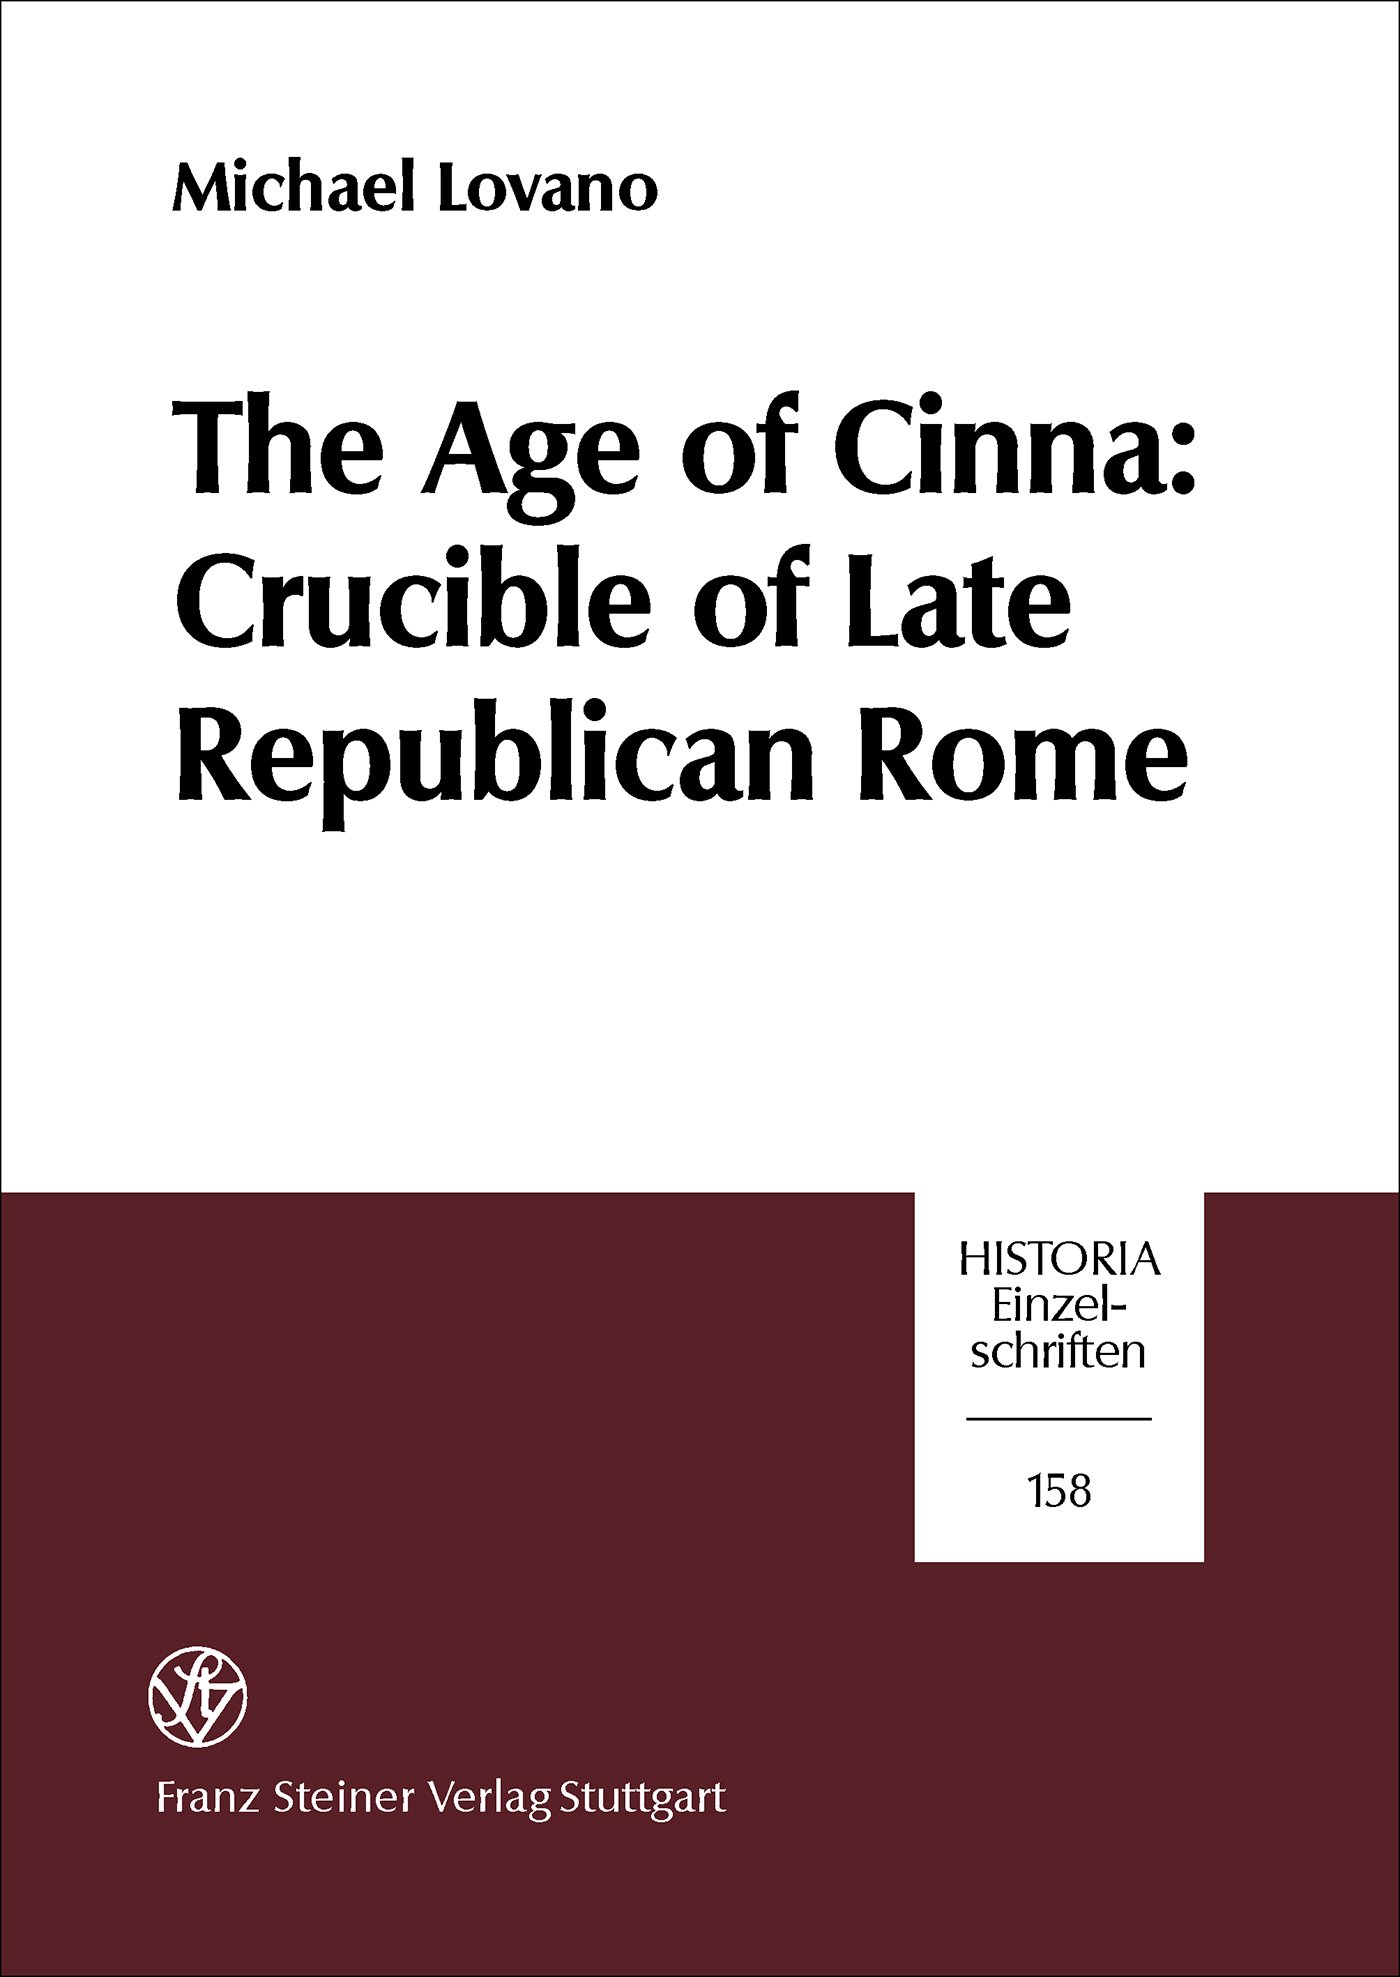 The Age of Cinna: Crucible of Late Republican Rome